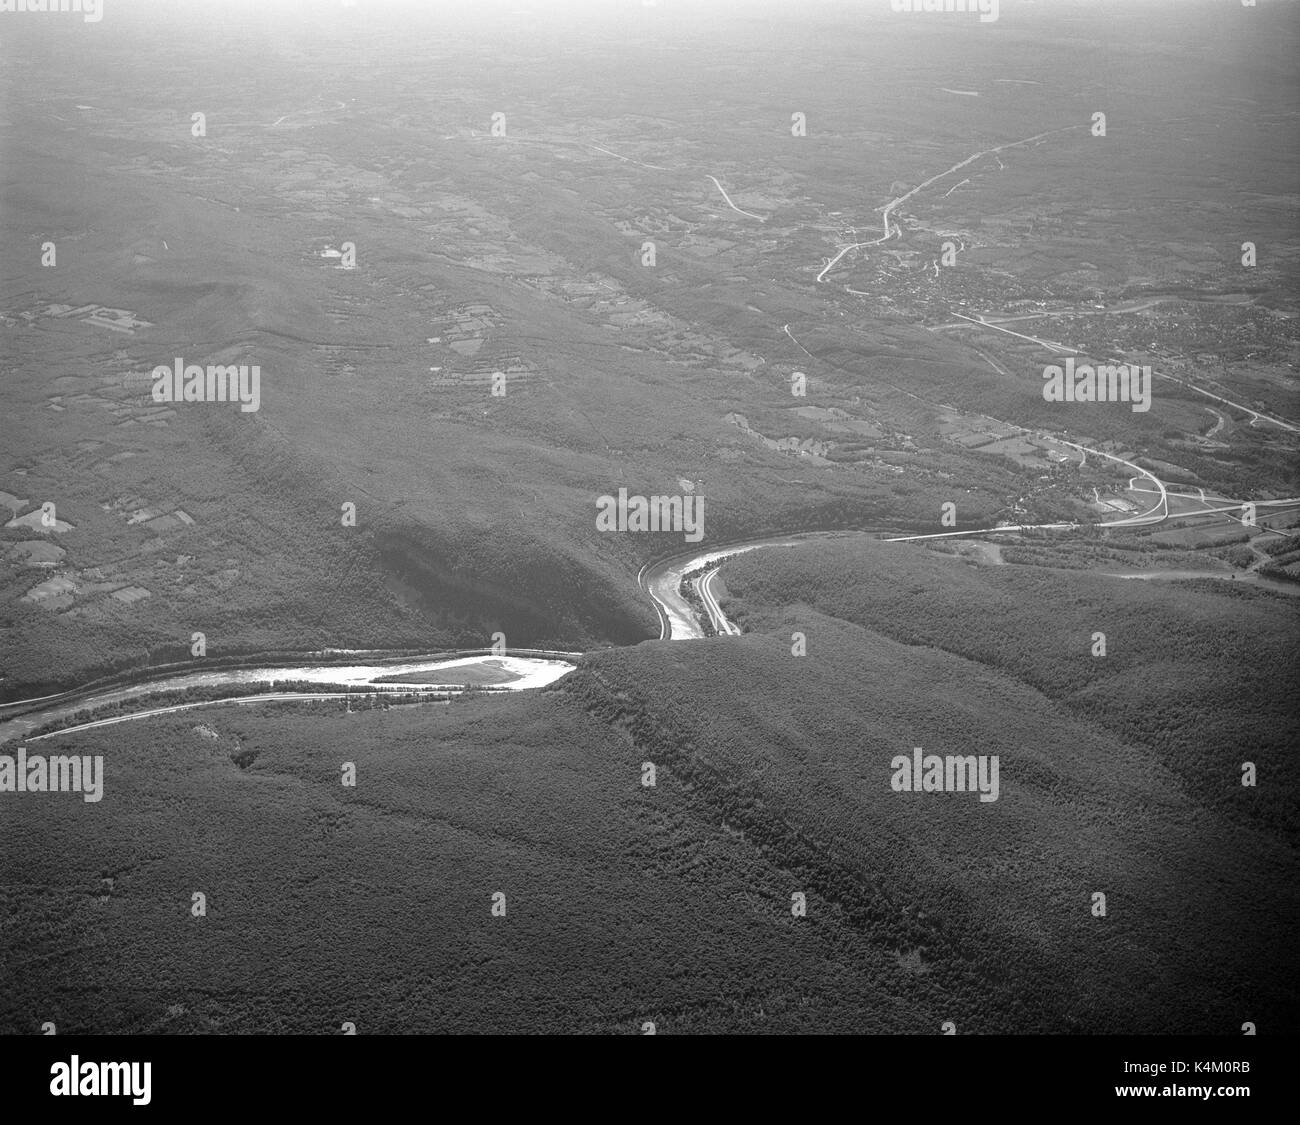 AERIAL VIEW OF THE DELAWARE RIVER AT THE DELAWARE WATER GAP, JUNE 1965, PENNSYLVANIA NEW JERSEY BORDER Stock Photo